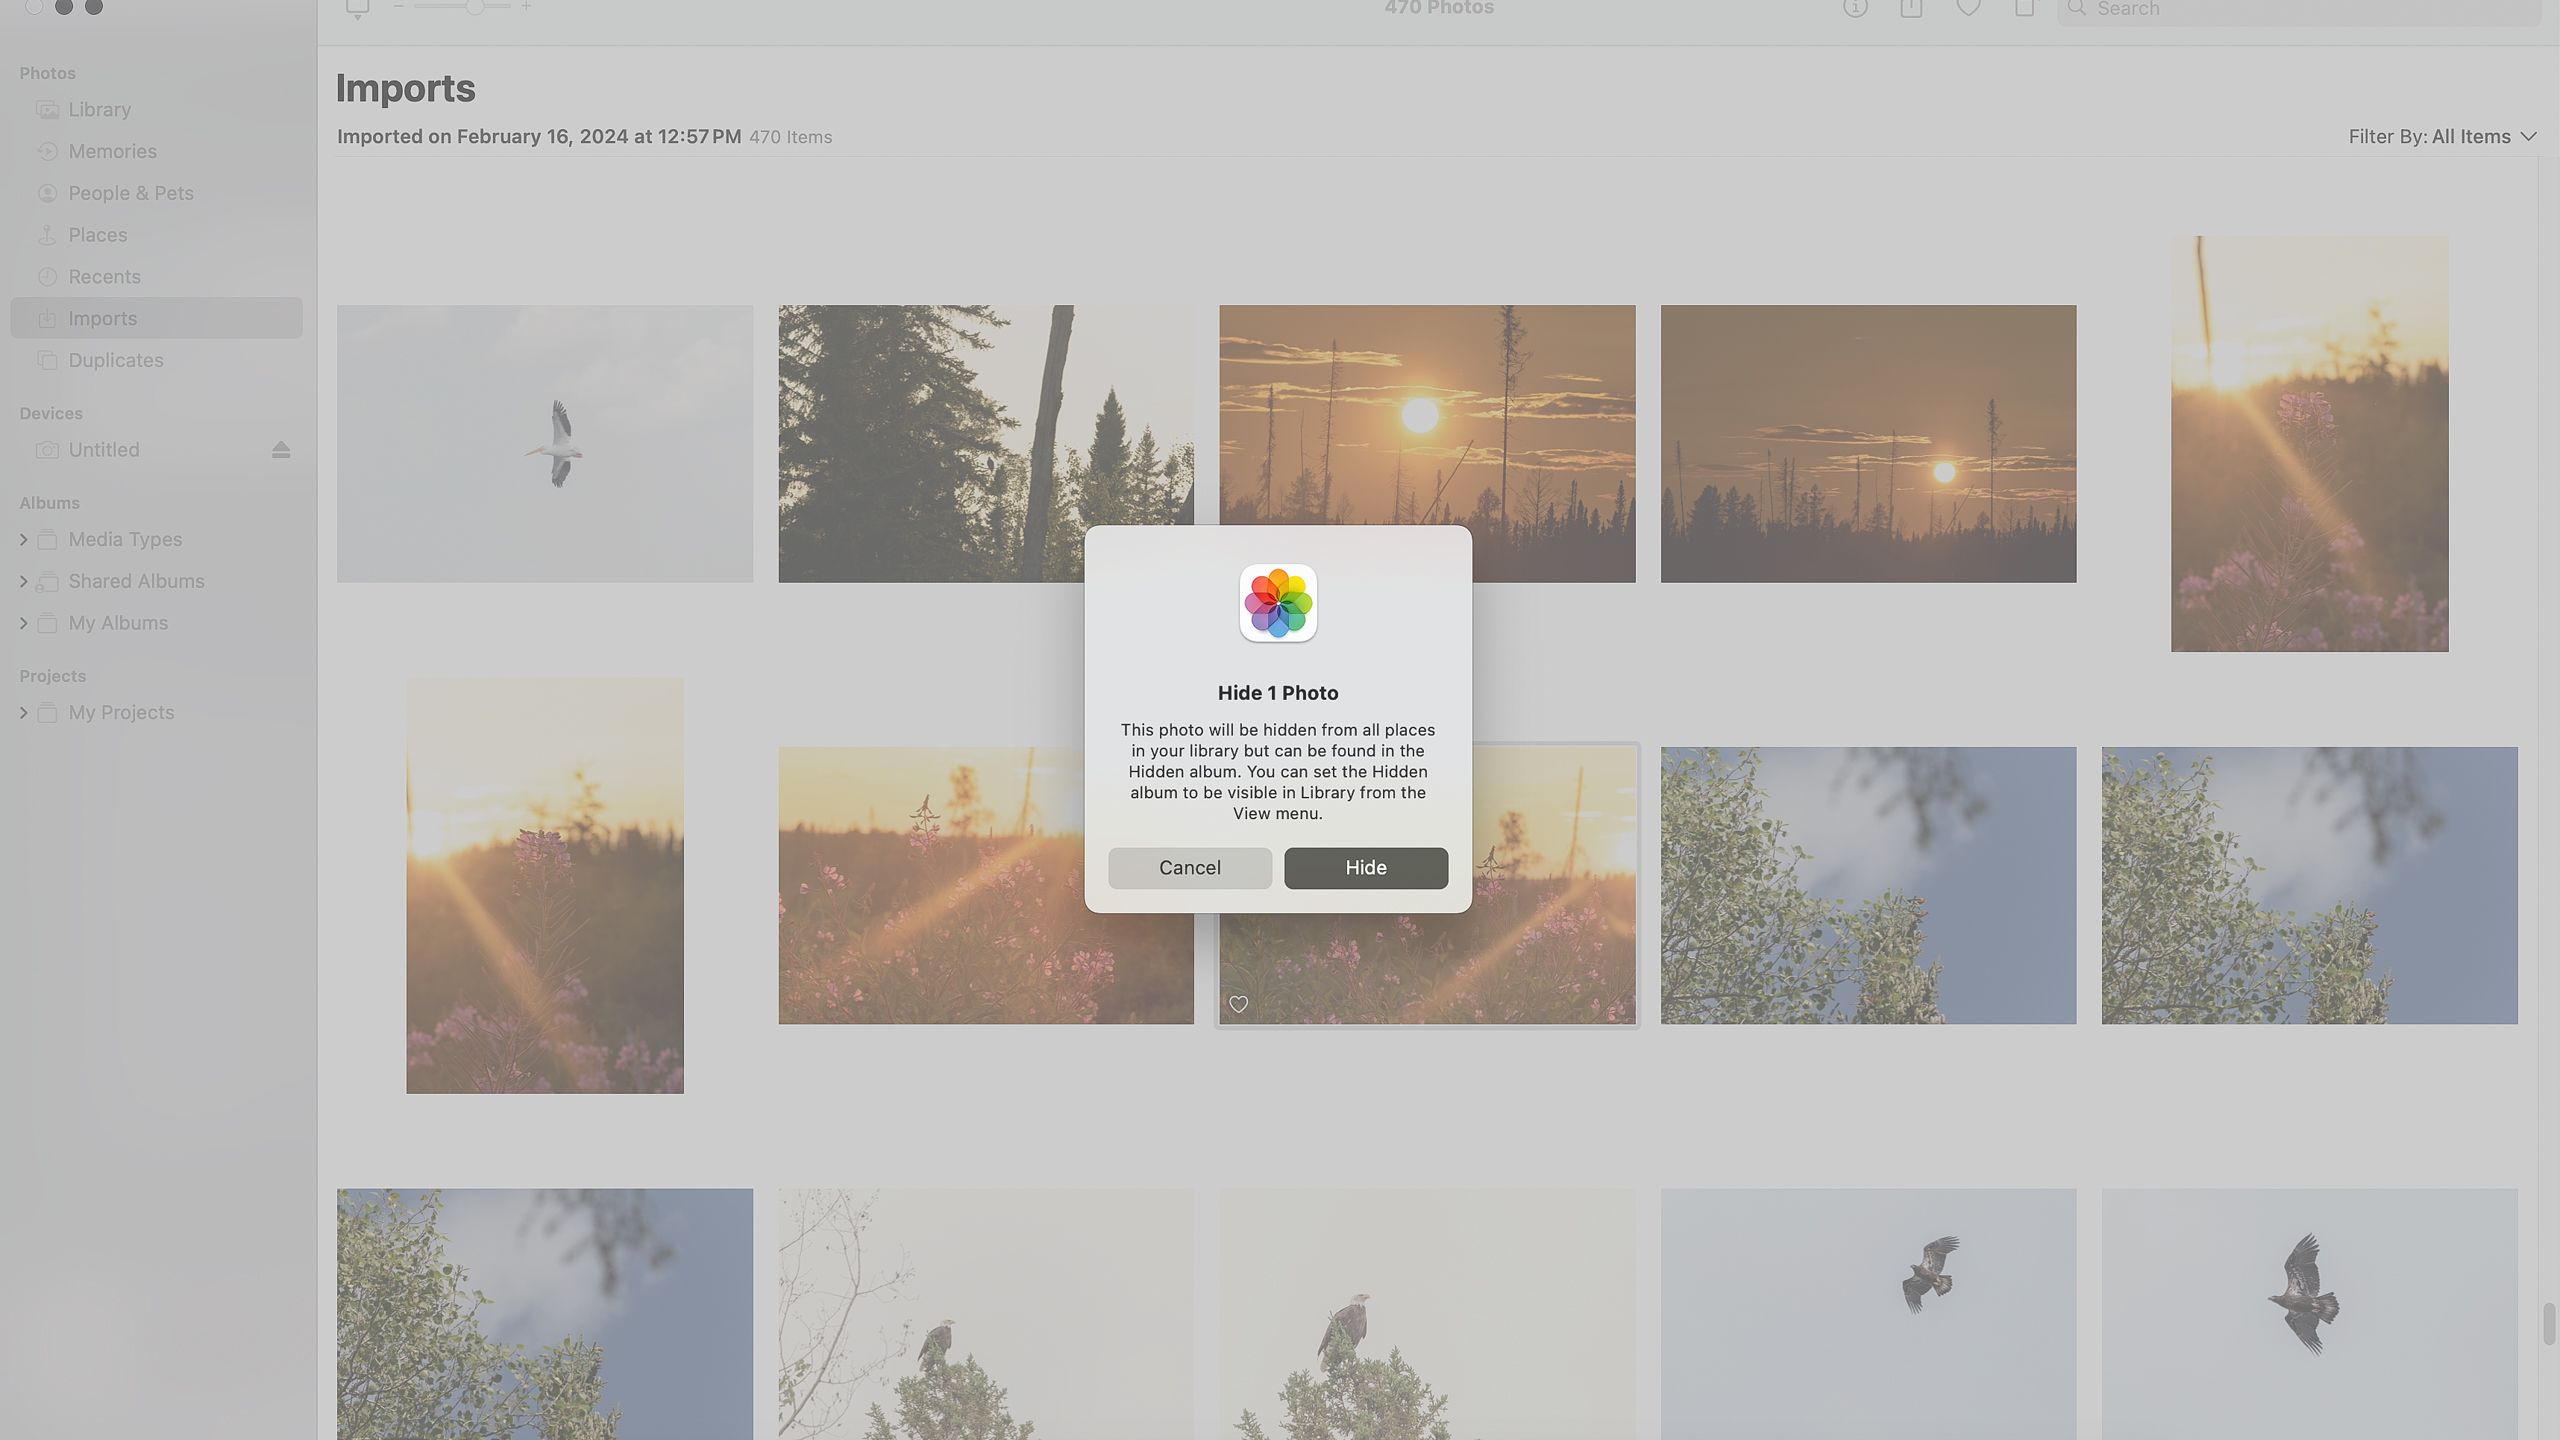 Screenshots of the process to hide a photo on a Mac